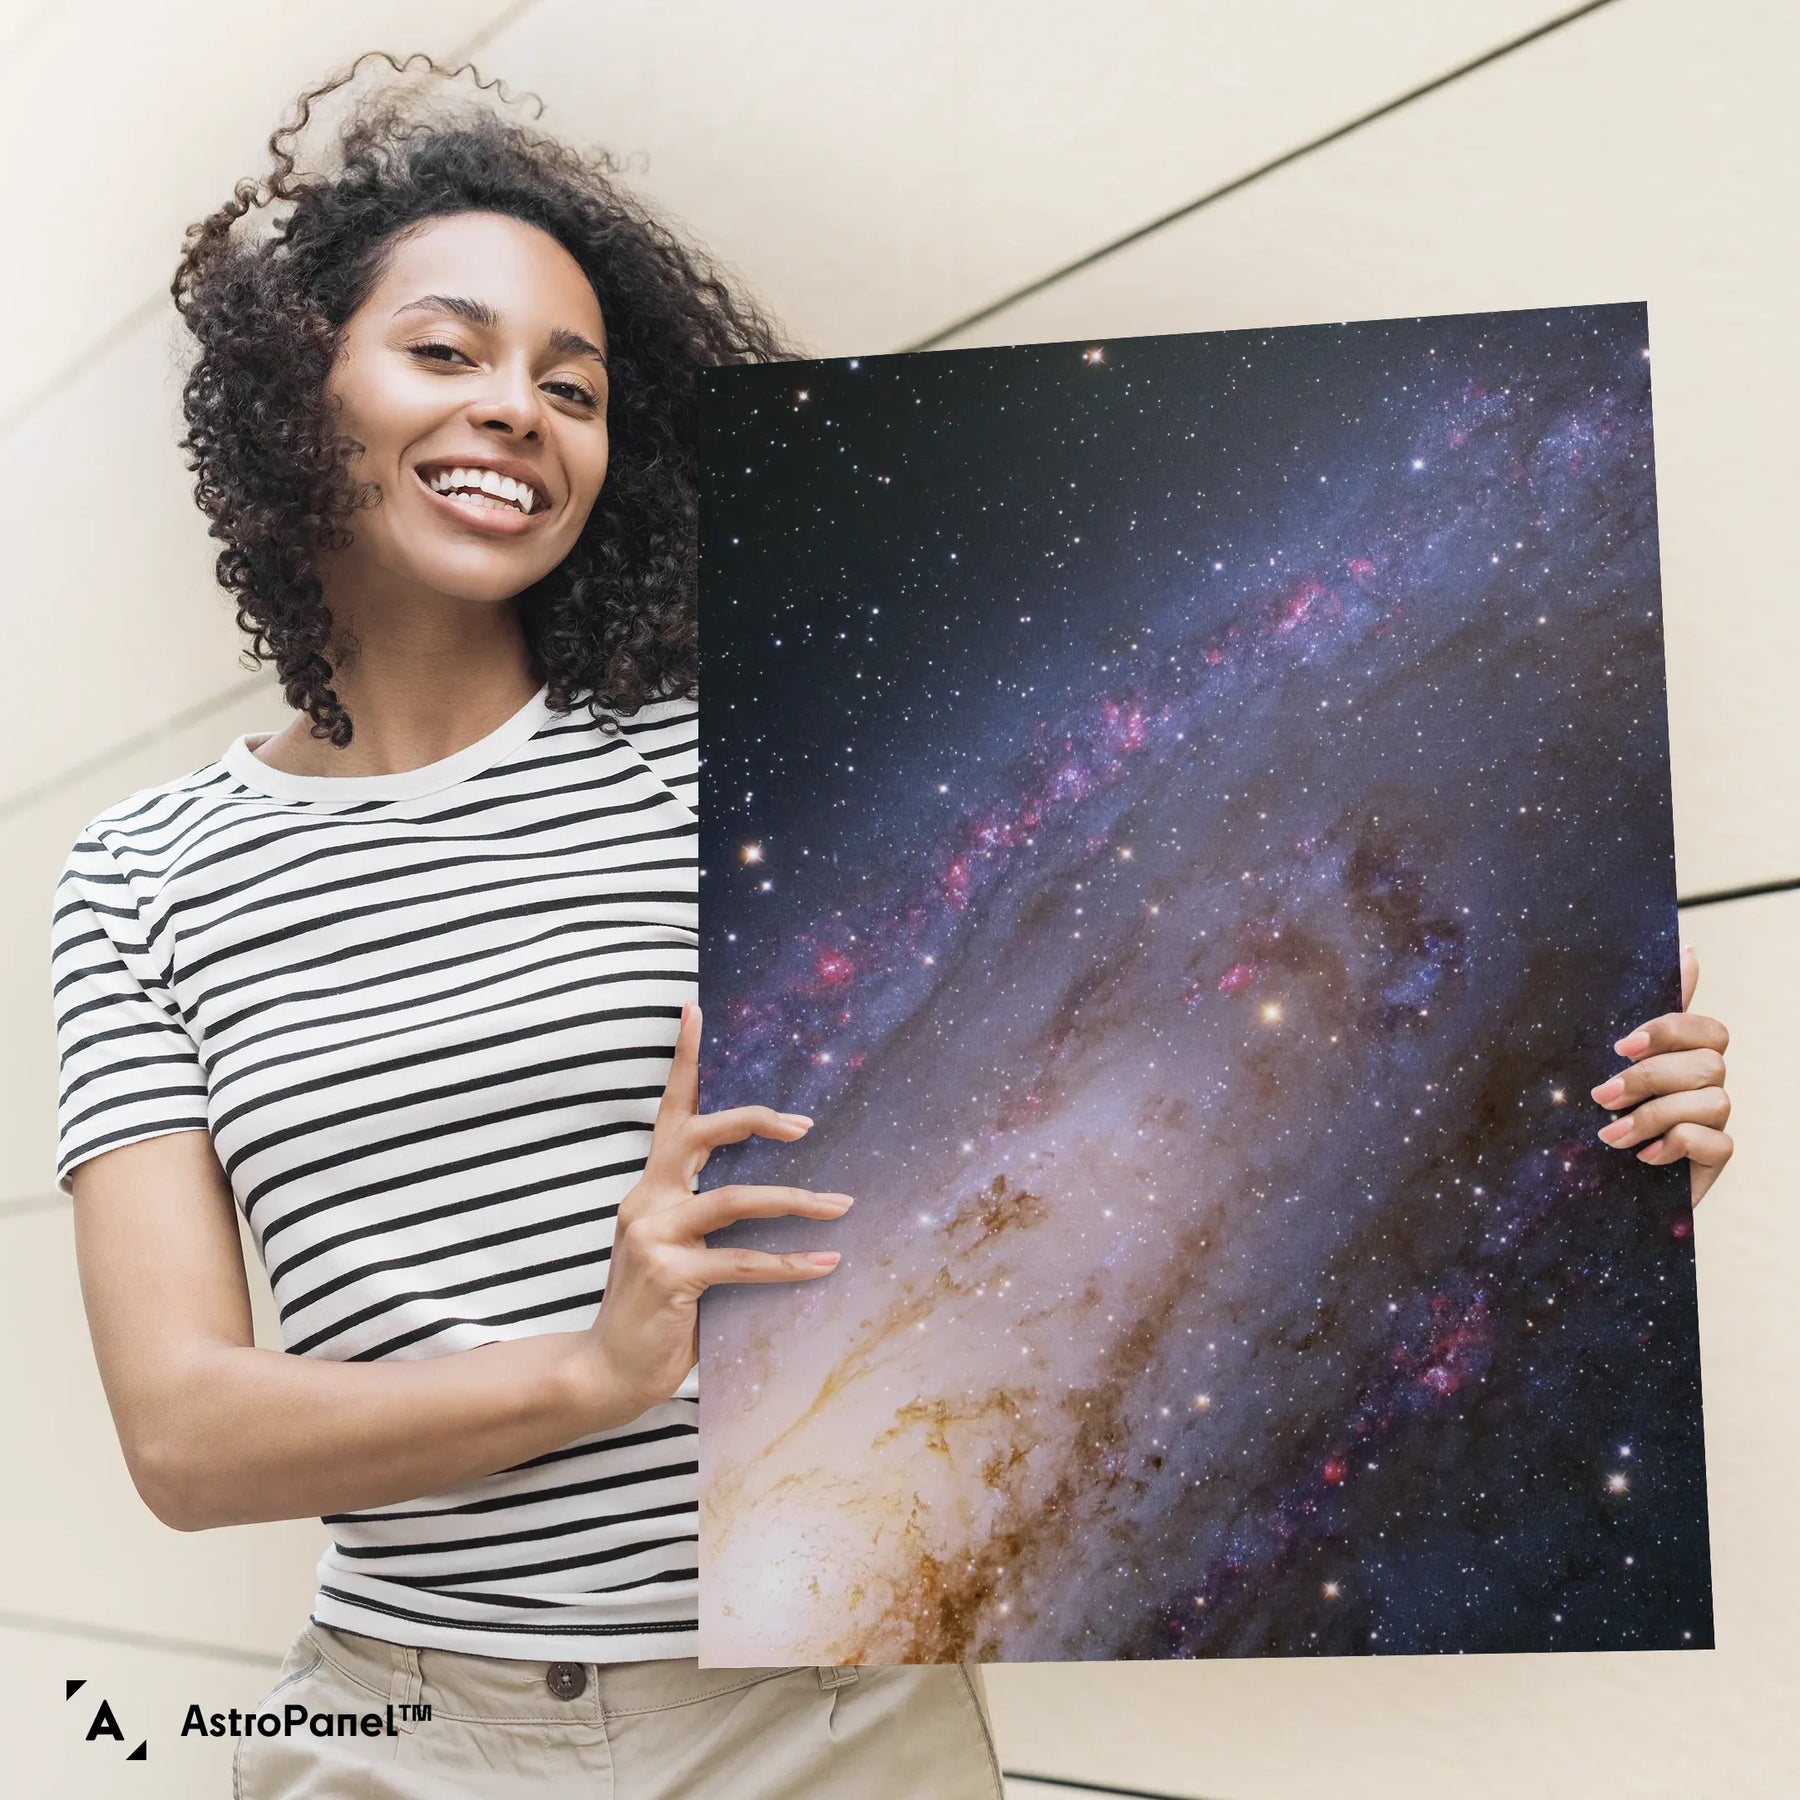 The Andromeda Galaxy for NES, Pixel Art (24 x 36) - Canvas Wrap Prin -  PersonalThrows